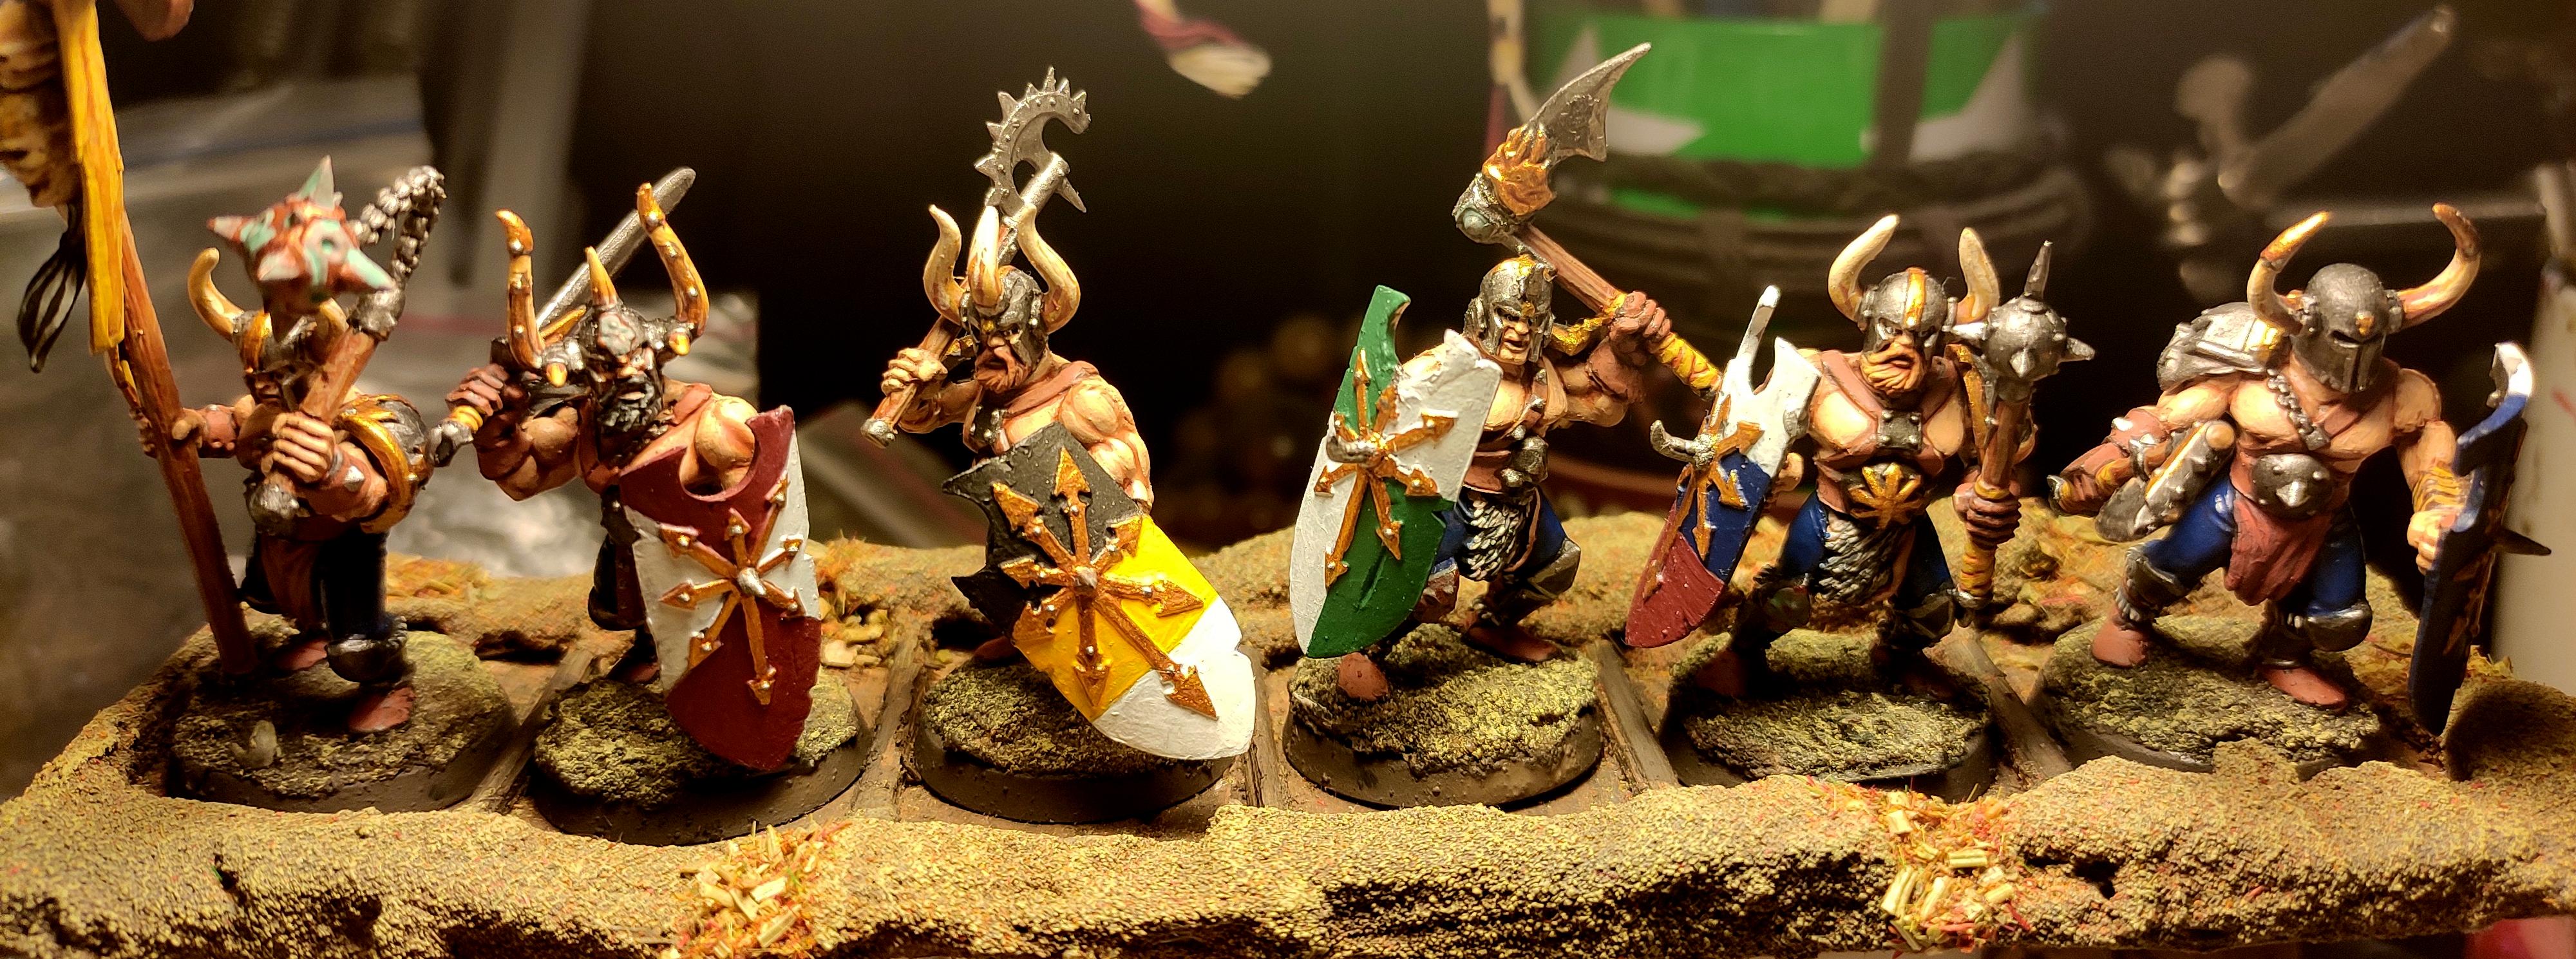 Age Of Sigmar, Axe, Banner, Barbarian, Beard, Conversion, Flail, Infantry, Mace, Marauders, Norsca, Regiment, Shield, Slaves To Darkness, Sword, Warband, Warhammer Fantasy, Warriors